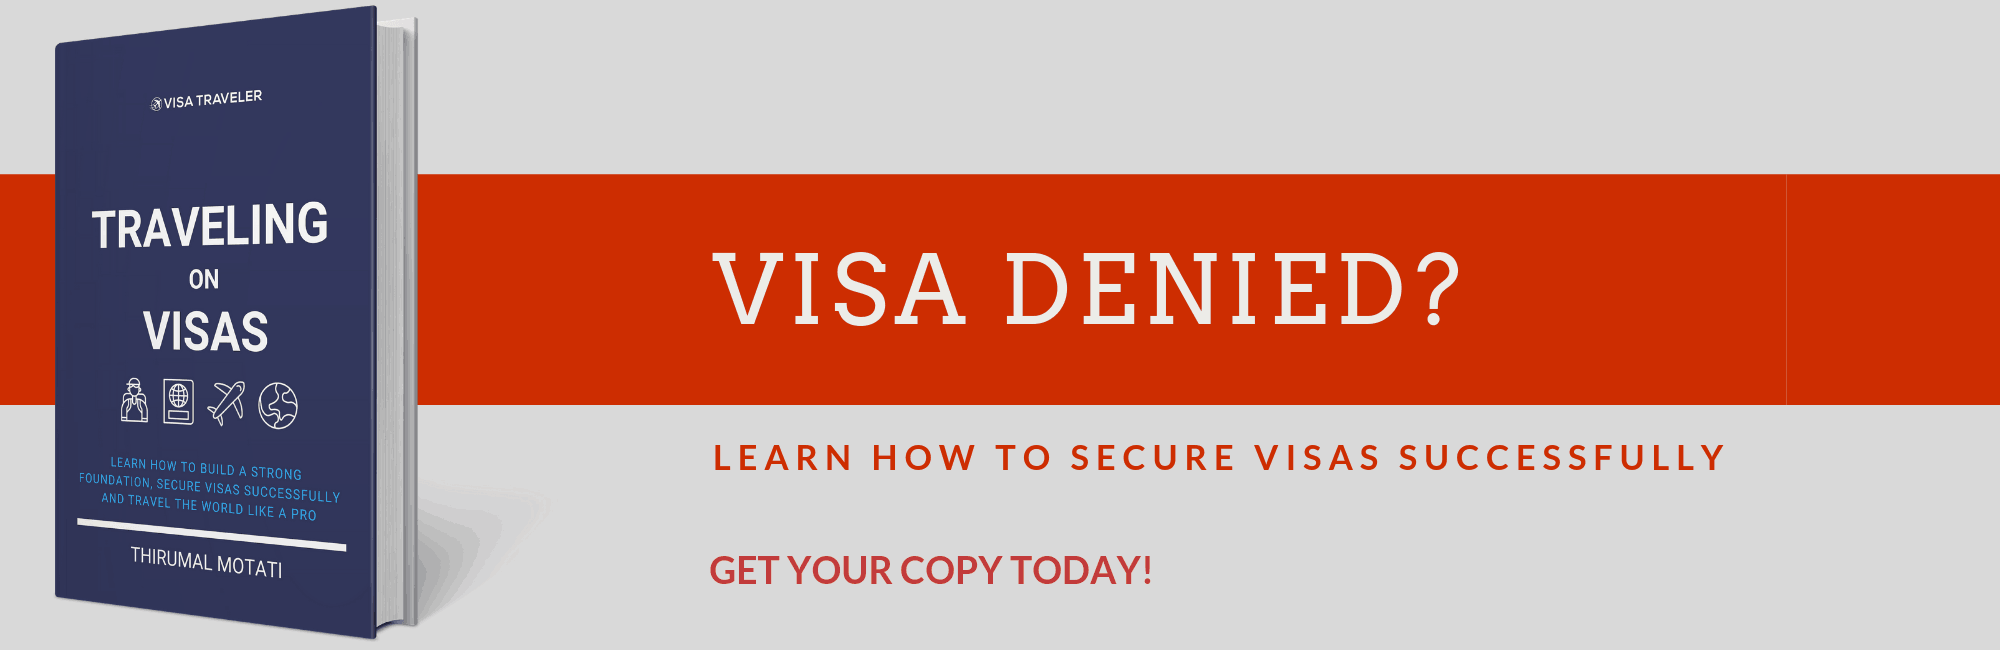 11 Mistakes That Can Get Your Visa Application Denied And How To